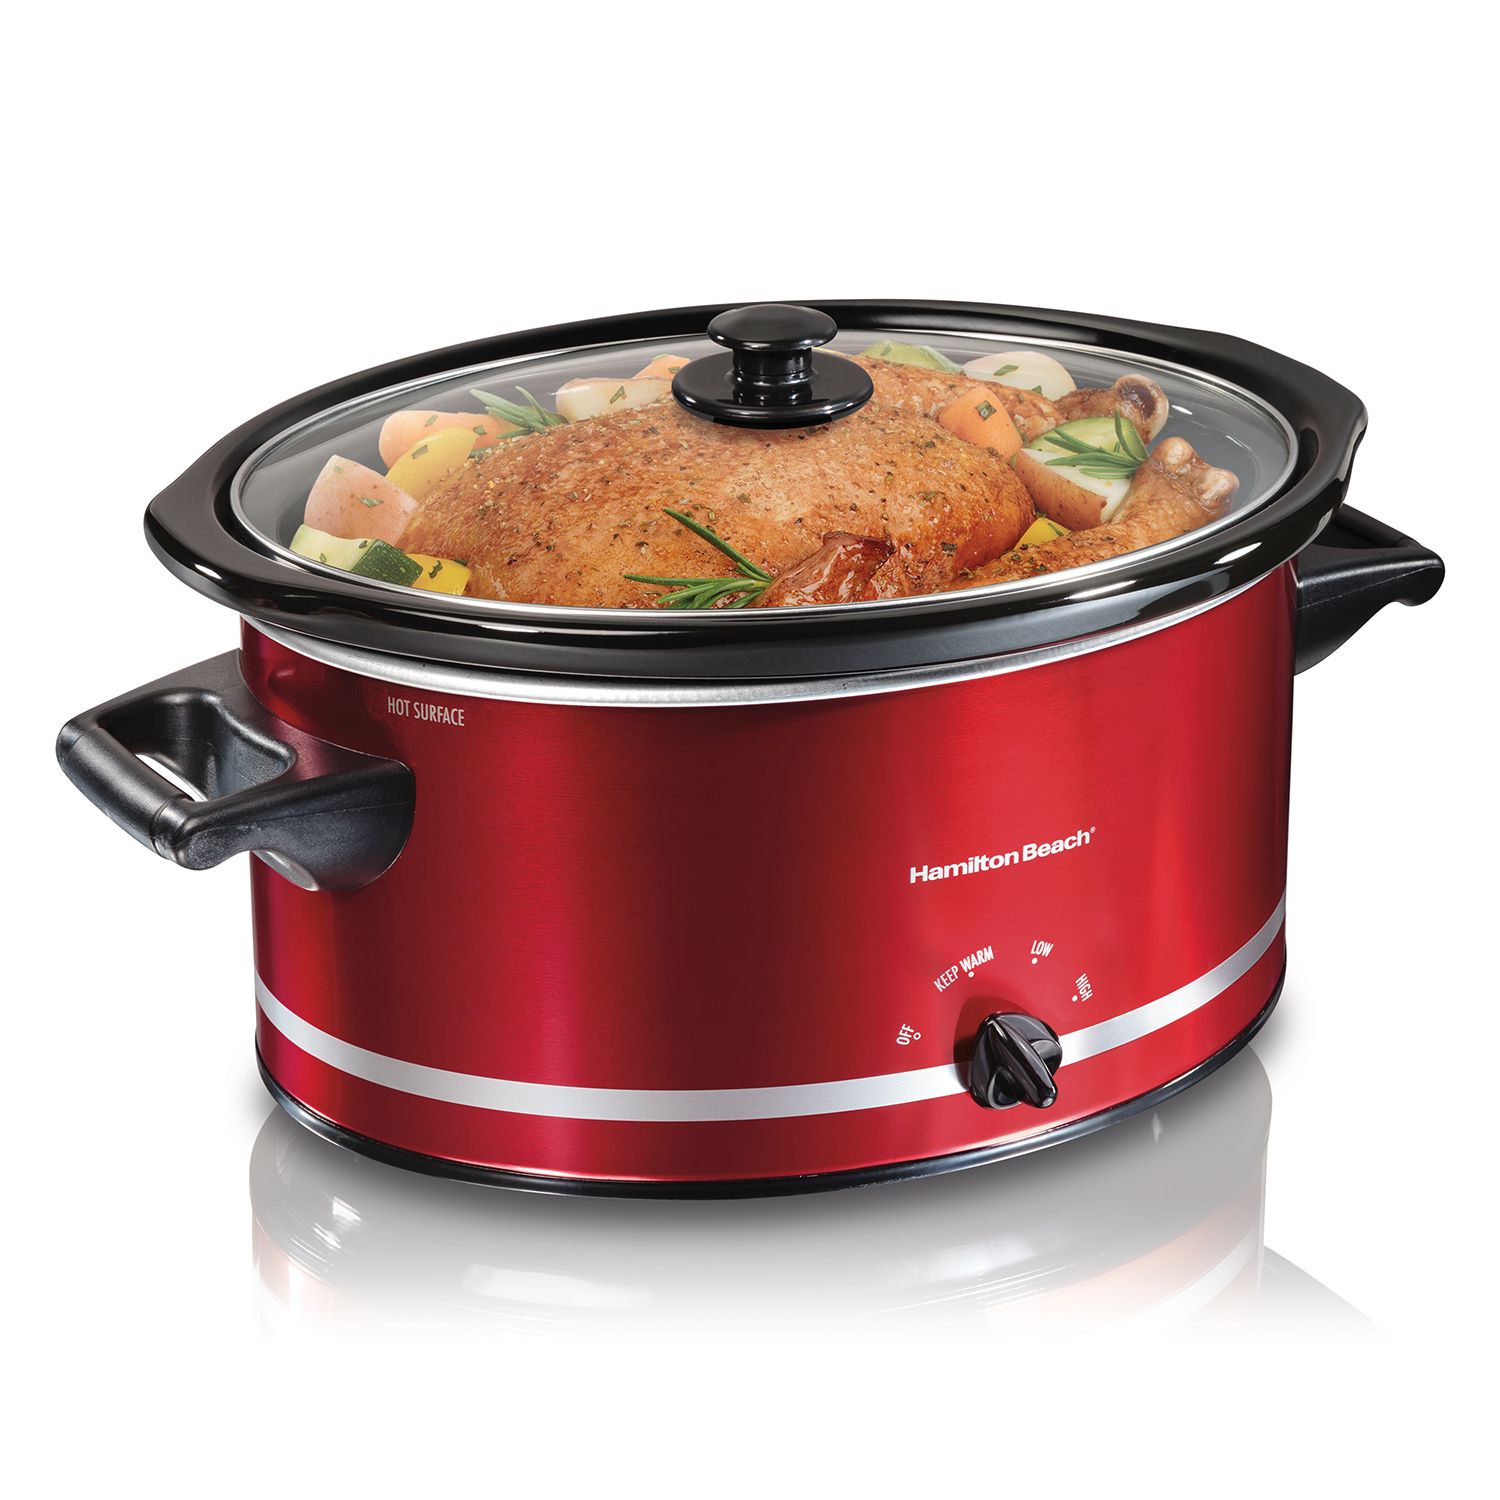 Toastmaster 4-Quart Digital Slow Cooker with Locking Lid (Red)